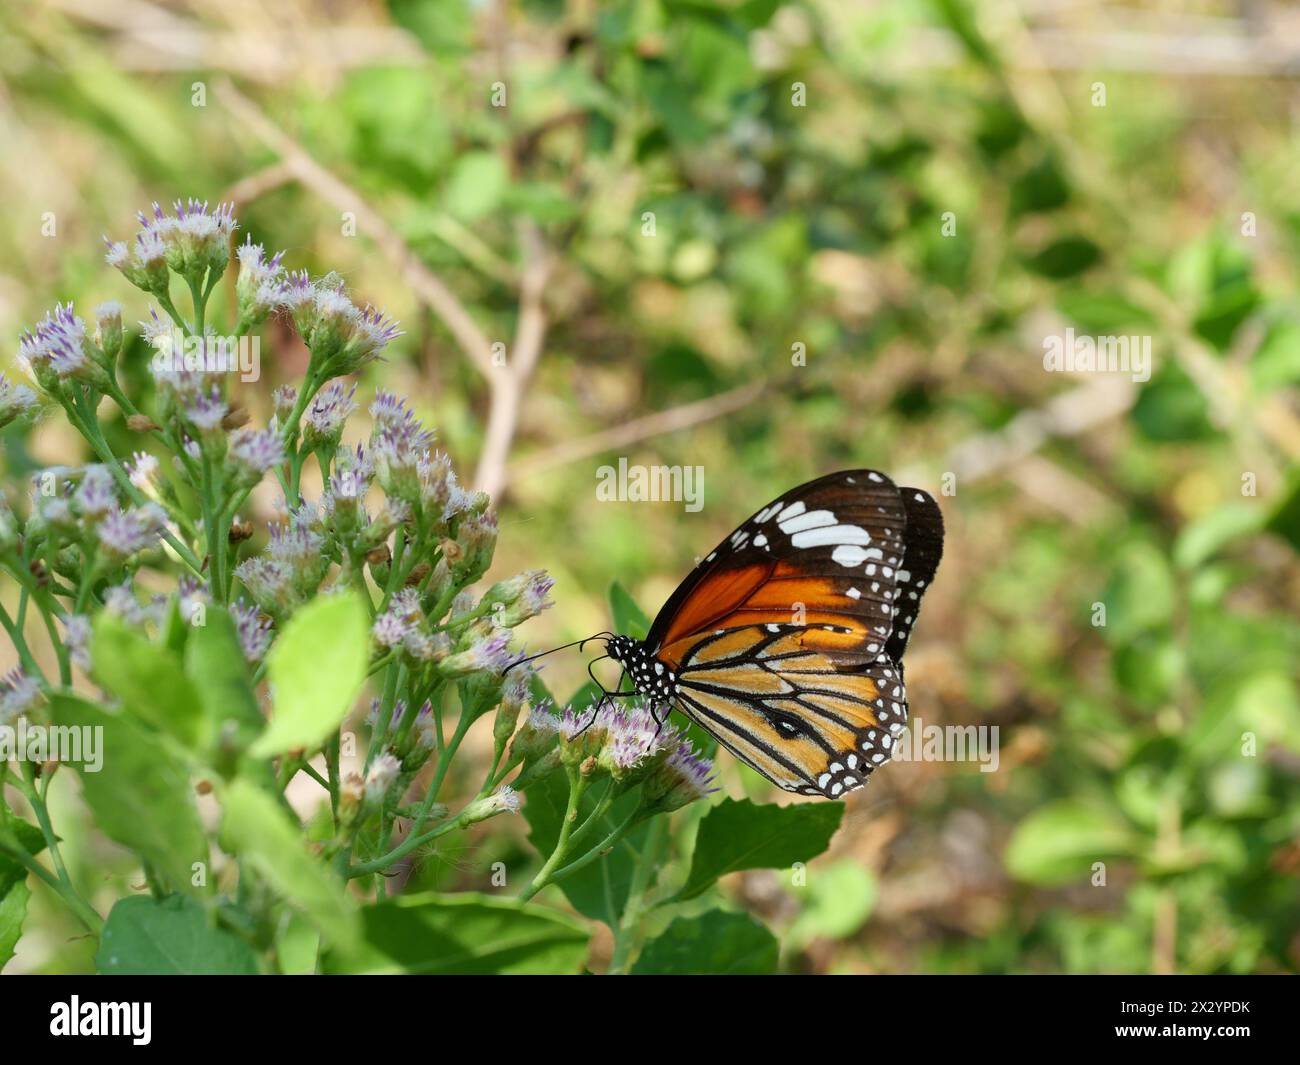 Orange with white and black color pattern on Common Tiger butterfly wing, Monarch butterfly seeking nectar on Bitter bush or Siam weed blossom Stock Photo